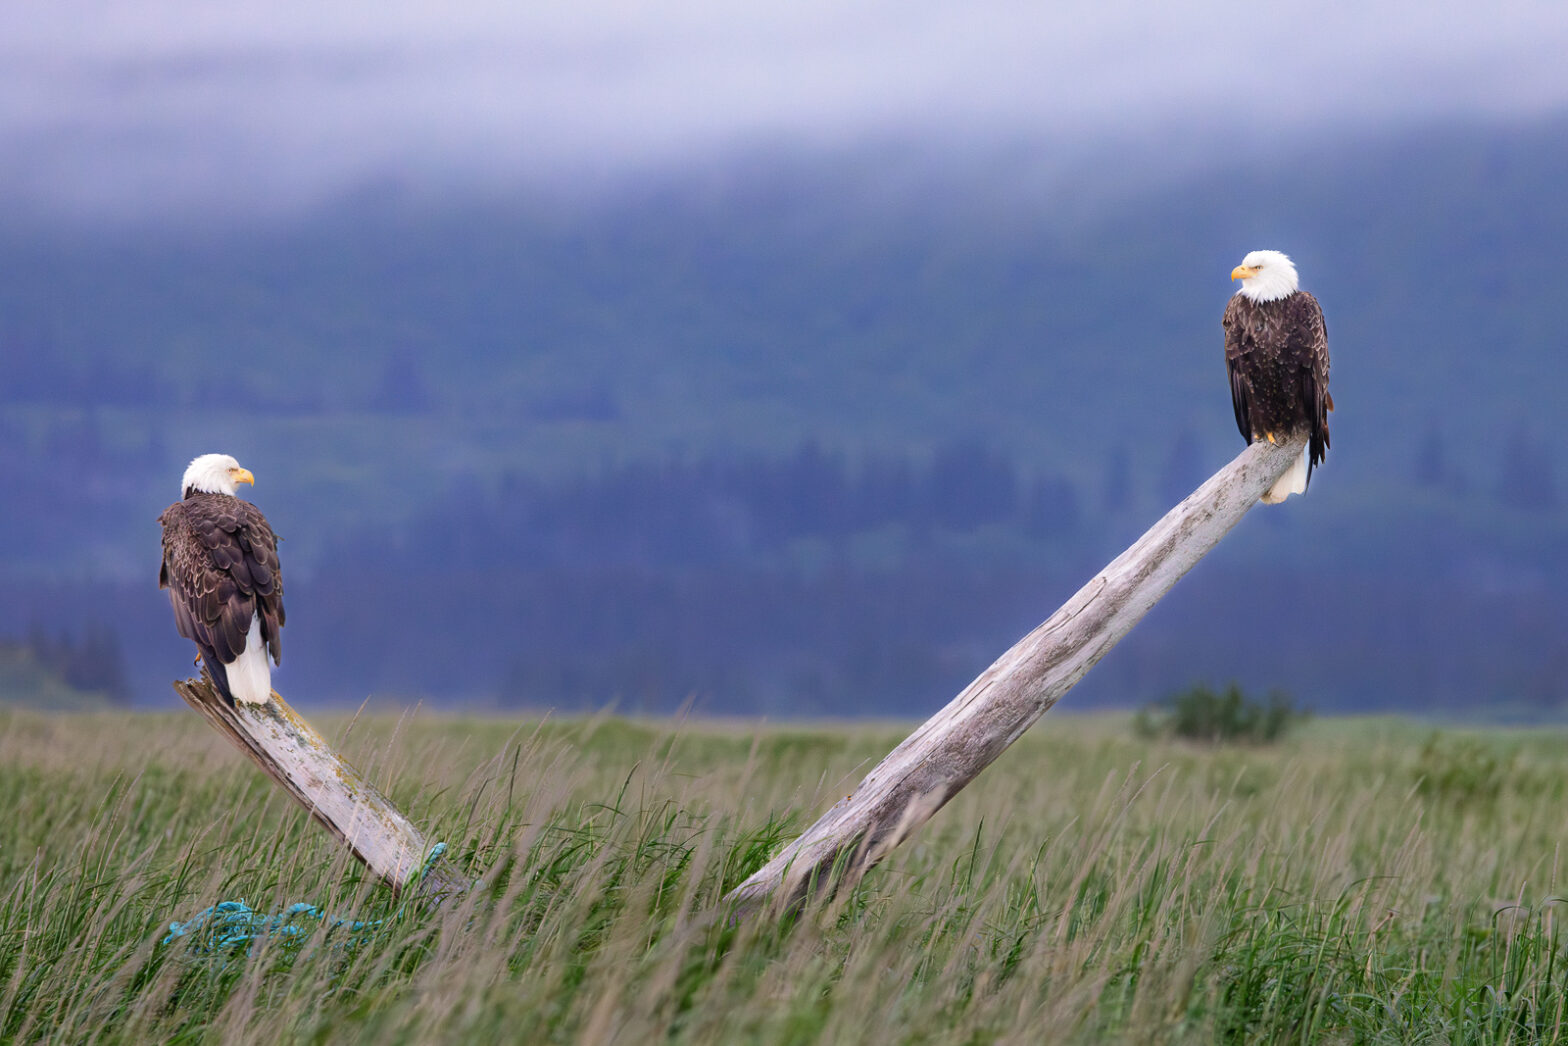 Wildlife photography of two Bald Eagles perched on driftwood in Alaska.